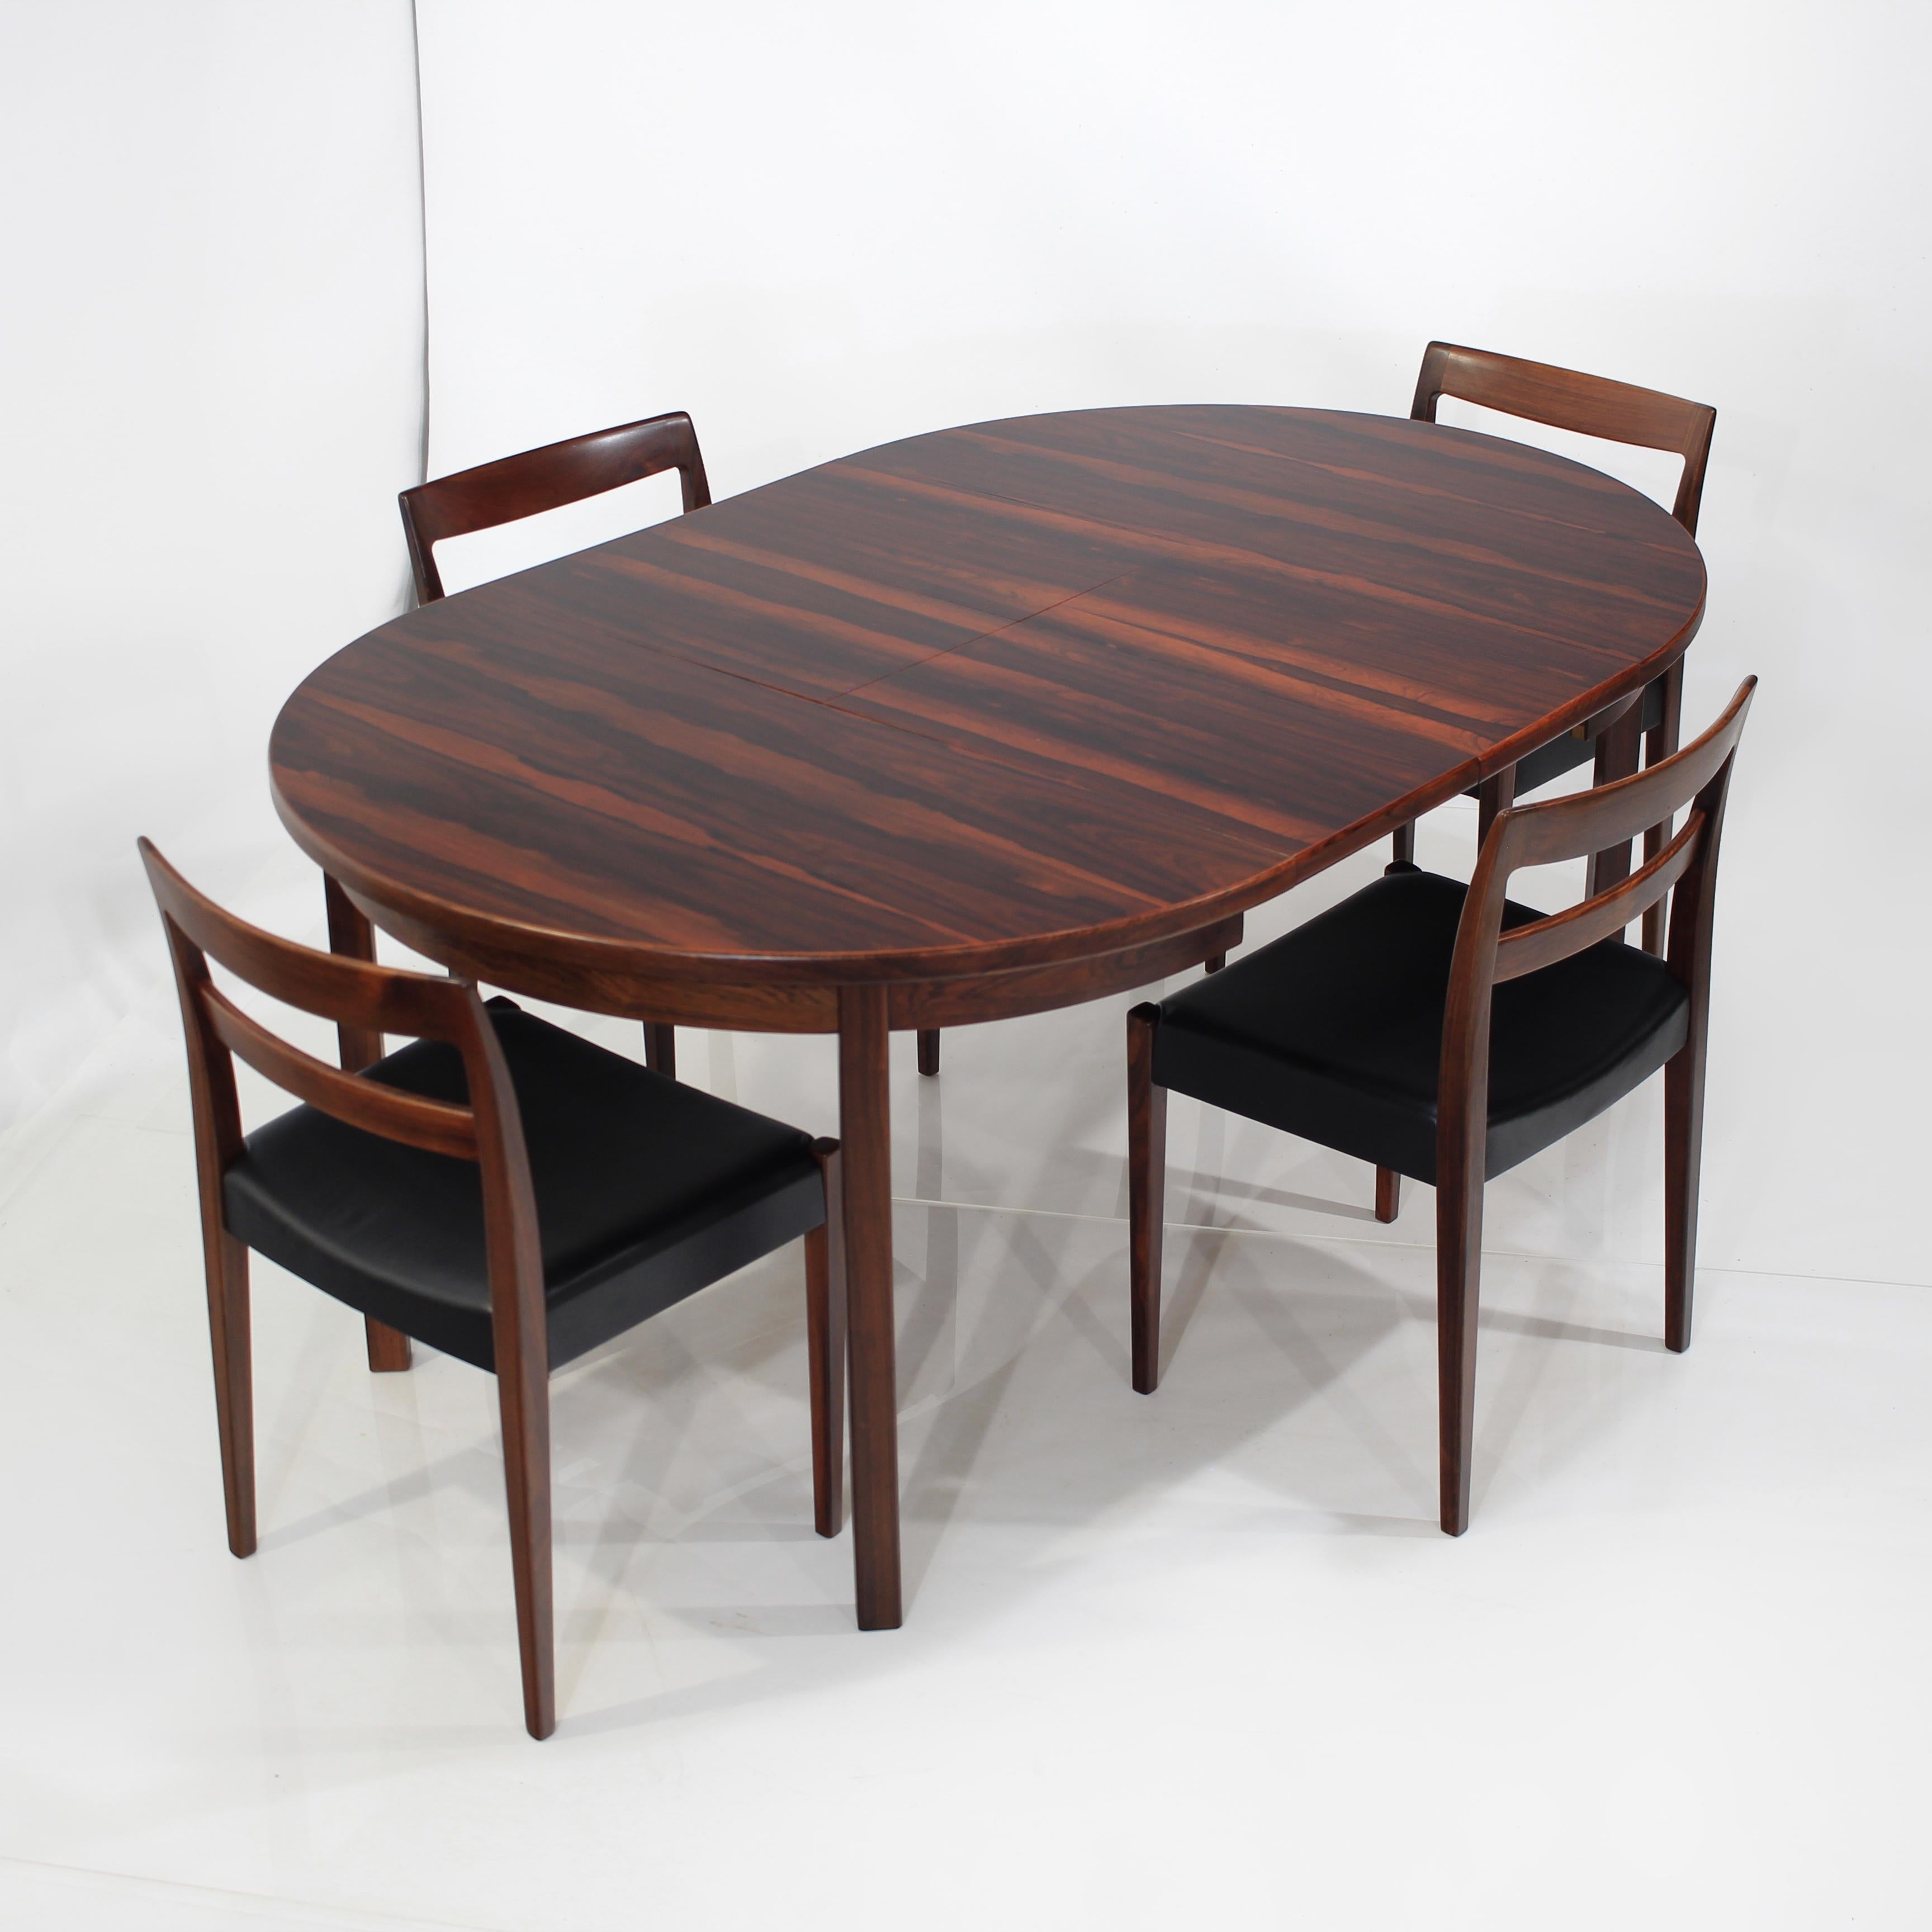 Presenting this wonderful rosewood dining set by Nils Jonsson for Troeds Bjarnum.

This dining set provides stunning visuals and consist of a rosewood expandable round table with two leaves. Leaves can store underneath the table.

The table has